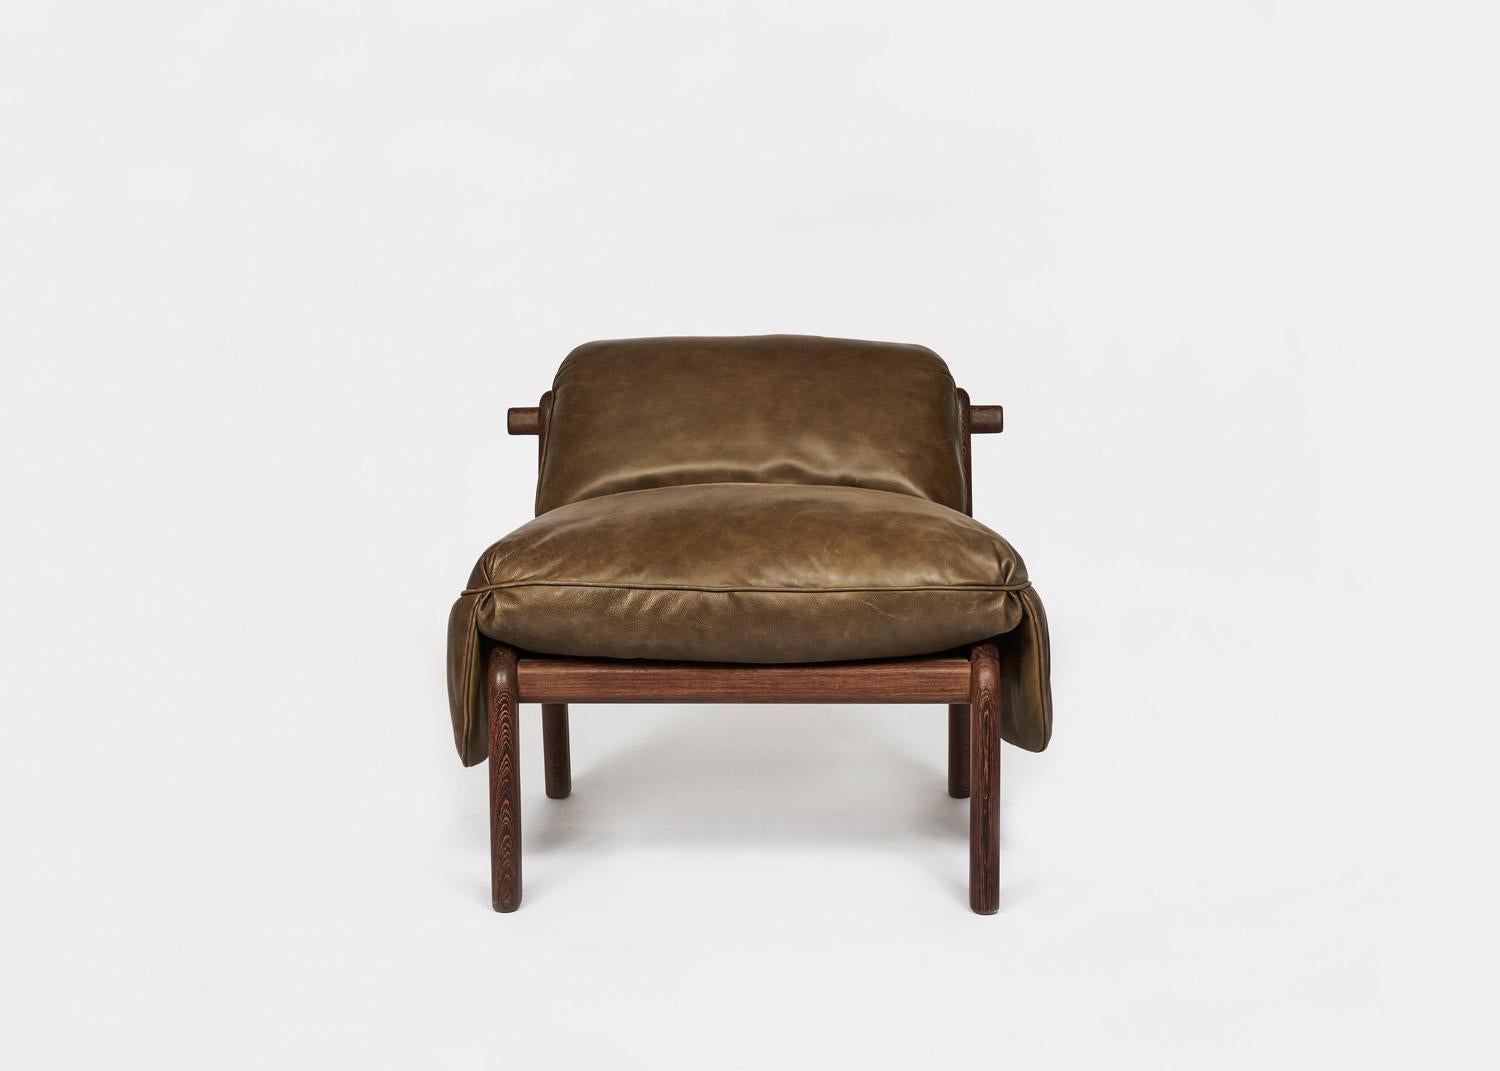 The RIO Armchair by CAPORUSSO finished in wenge wood and leather.

Handmade in Belgium, the Rio Armchair is available in a selected leathers and is made to order as per your finish specifications. Various options in choice of leather /